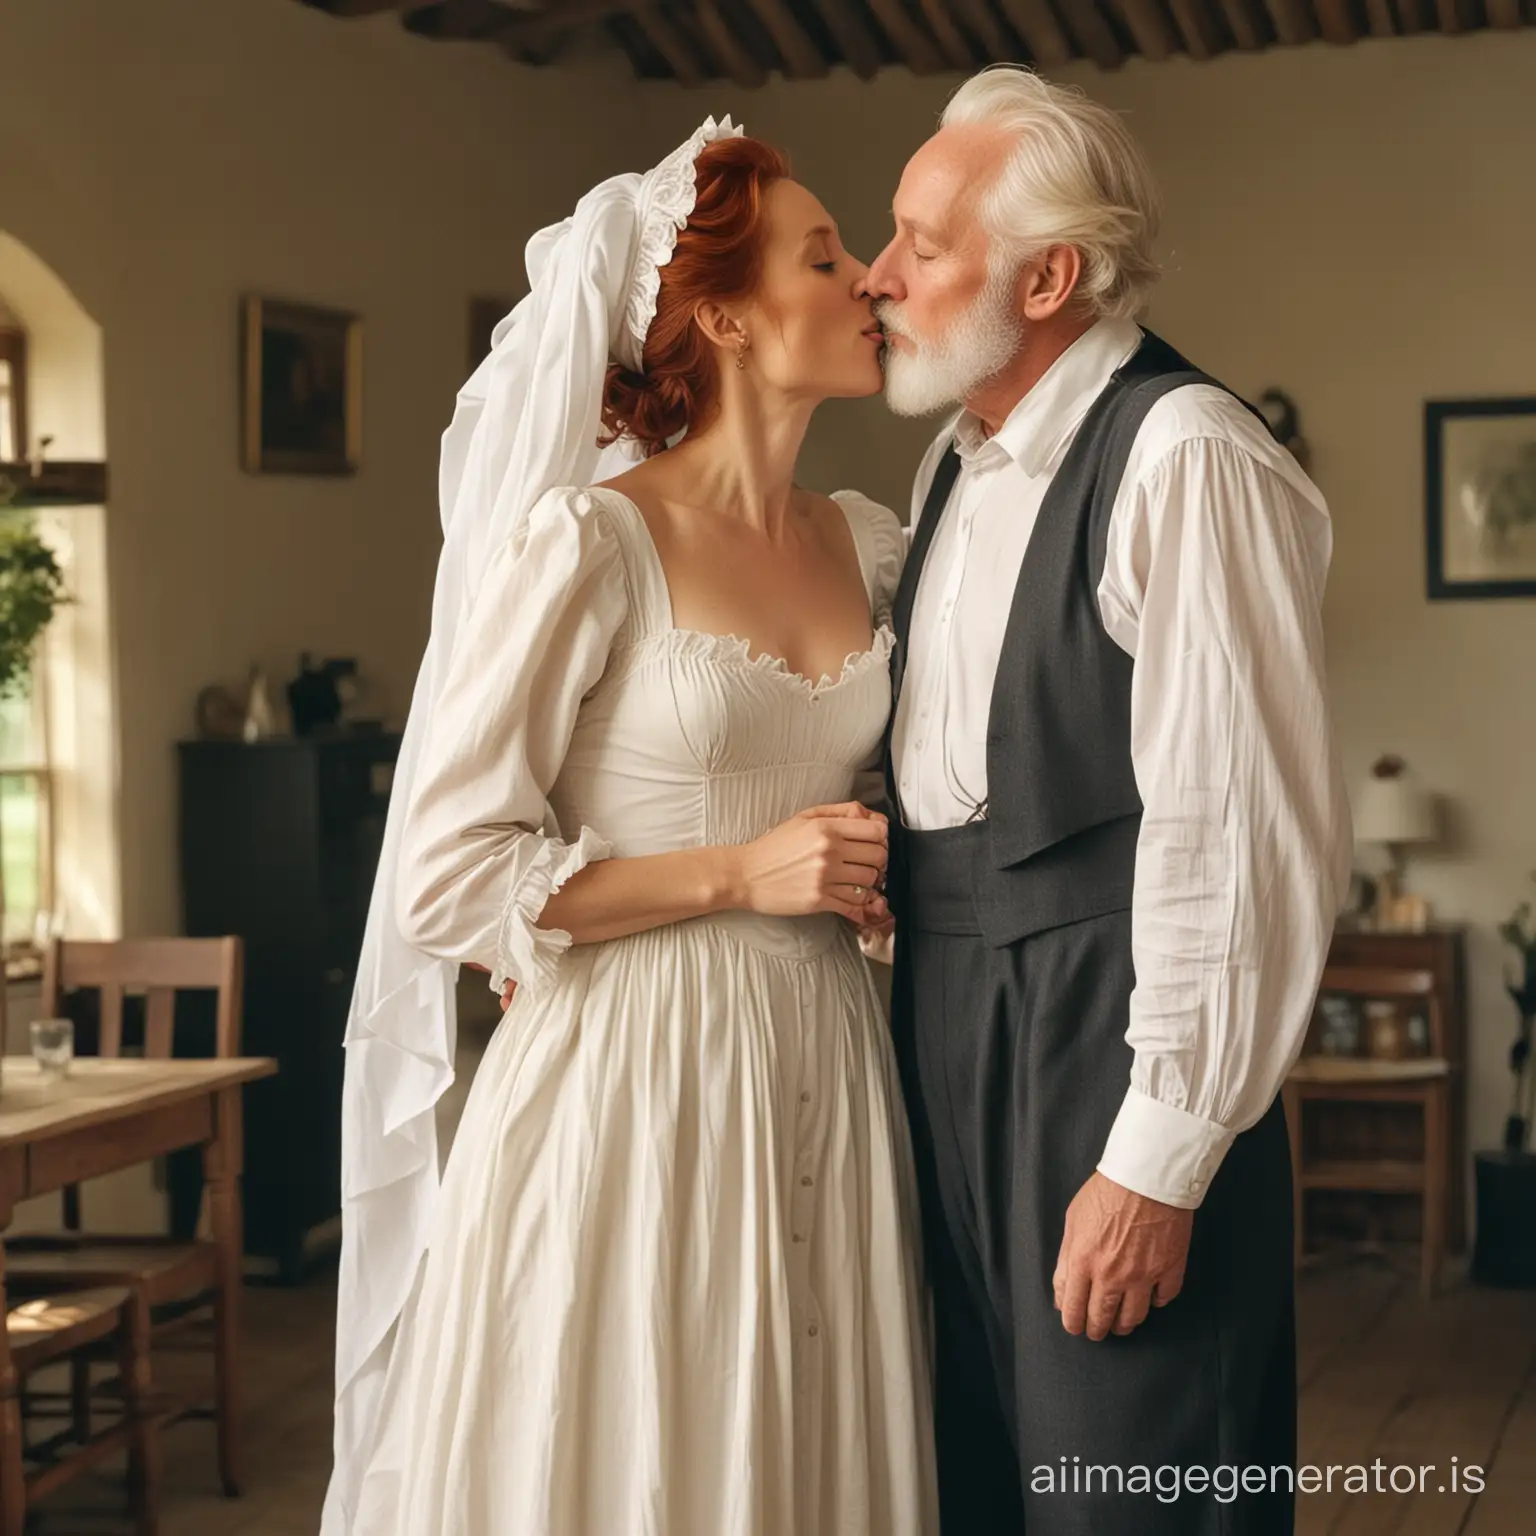 Romantic-RedHaired-Newlyweds-in-Traditional-Puritan-Attire-Sharing-a-Kiss